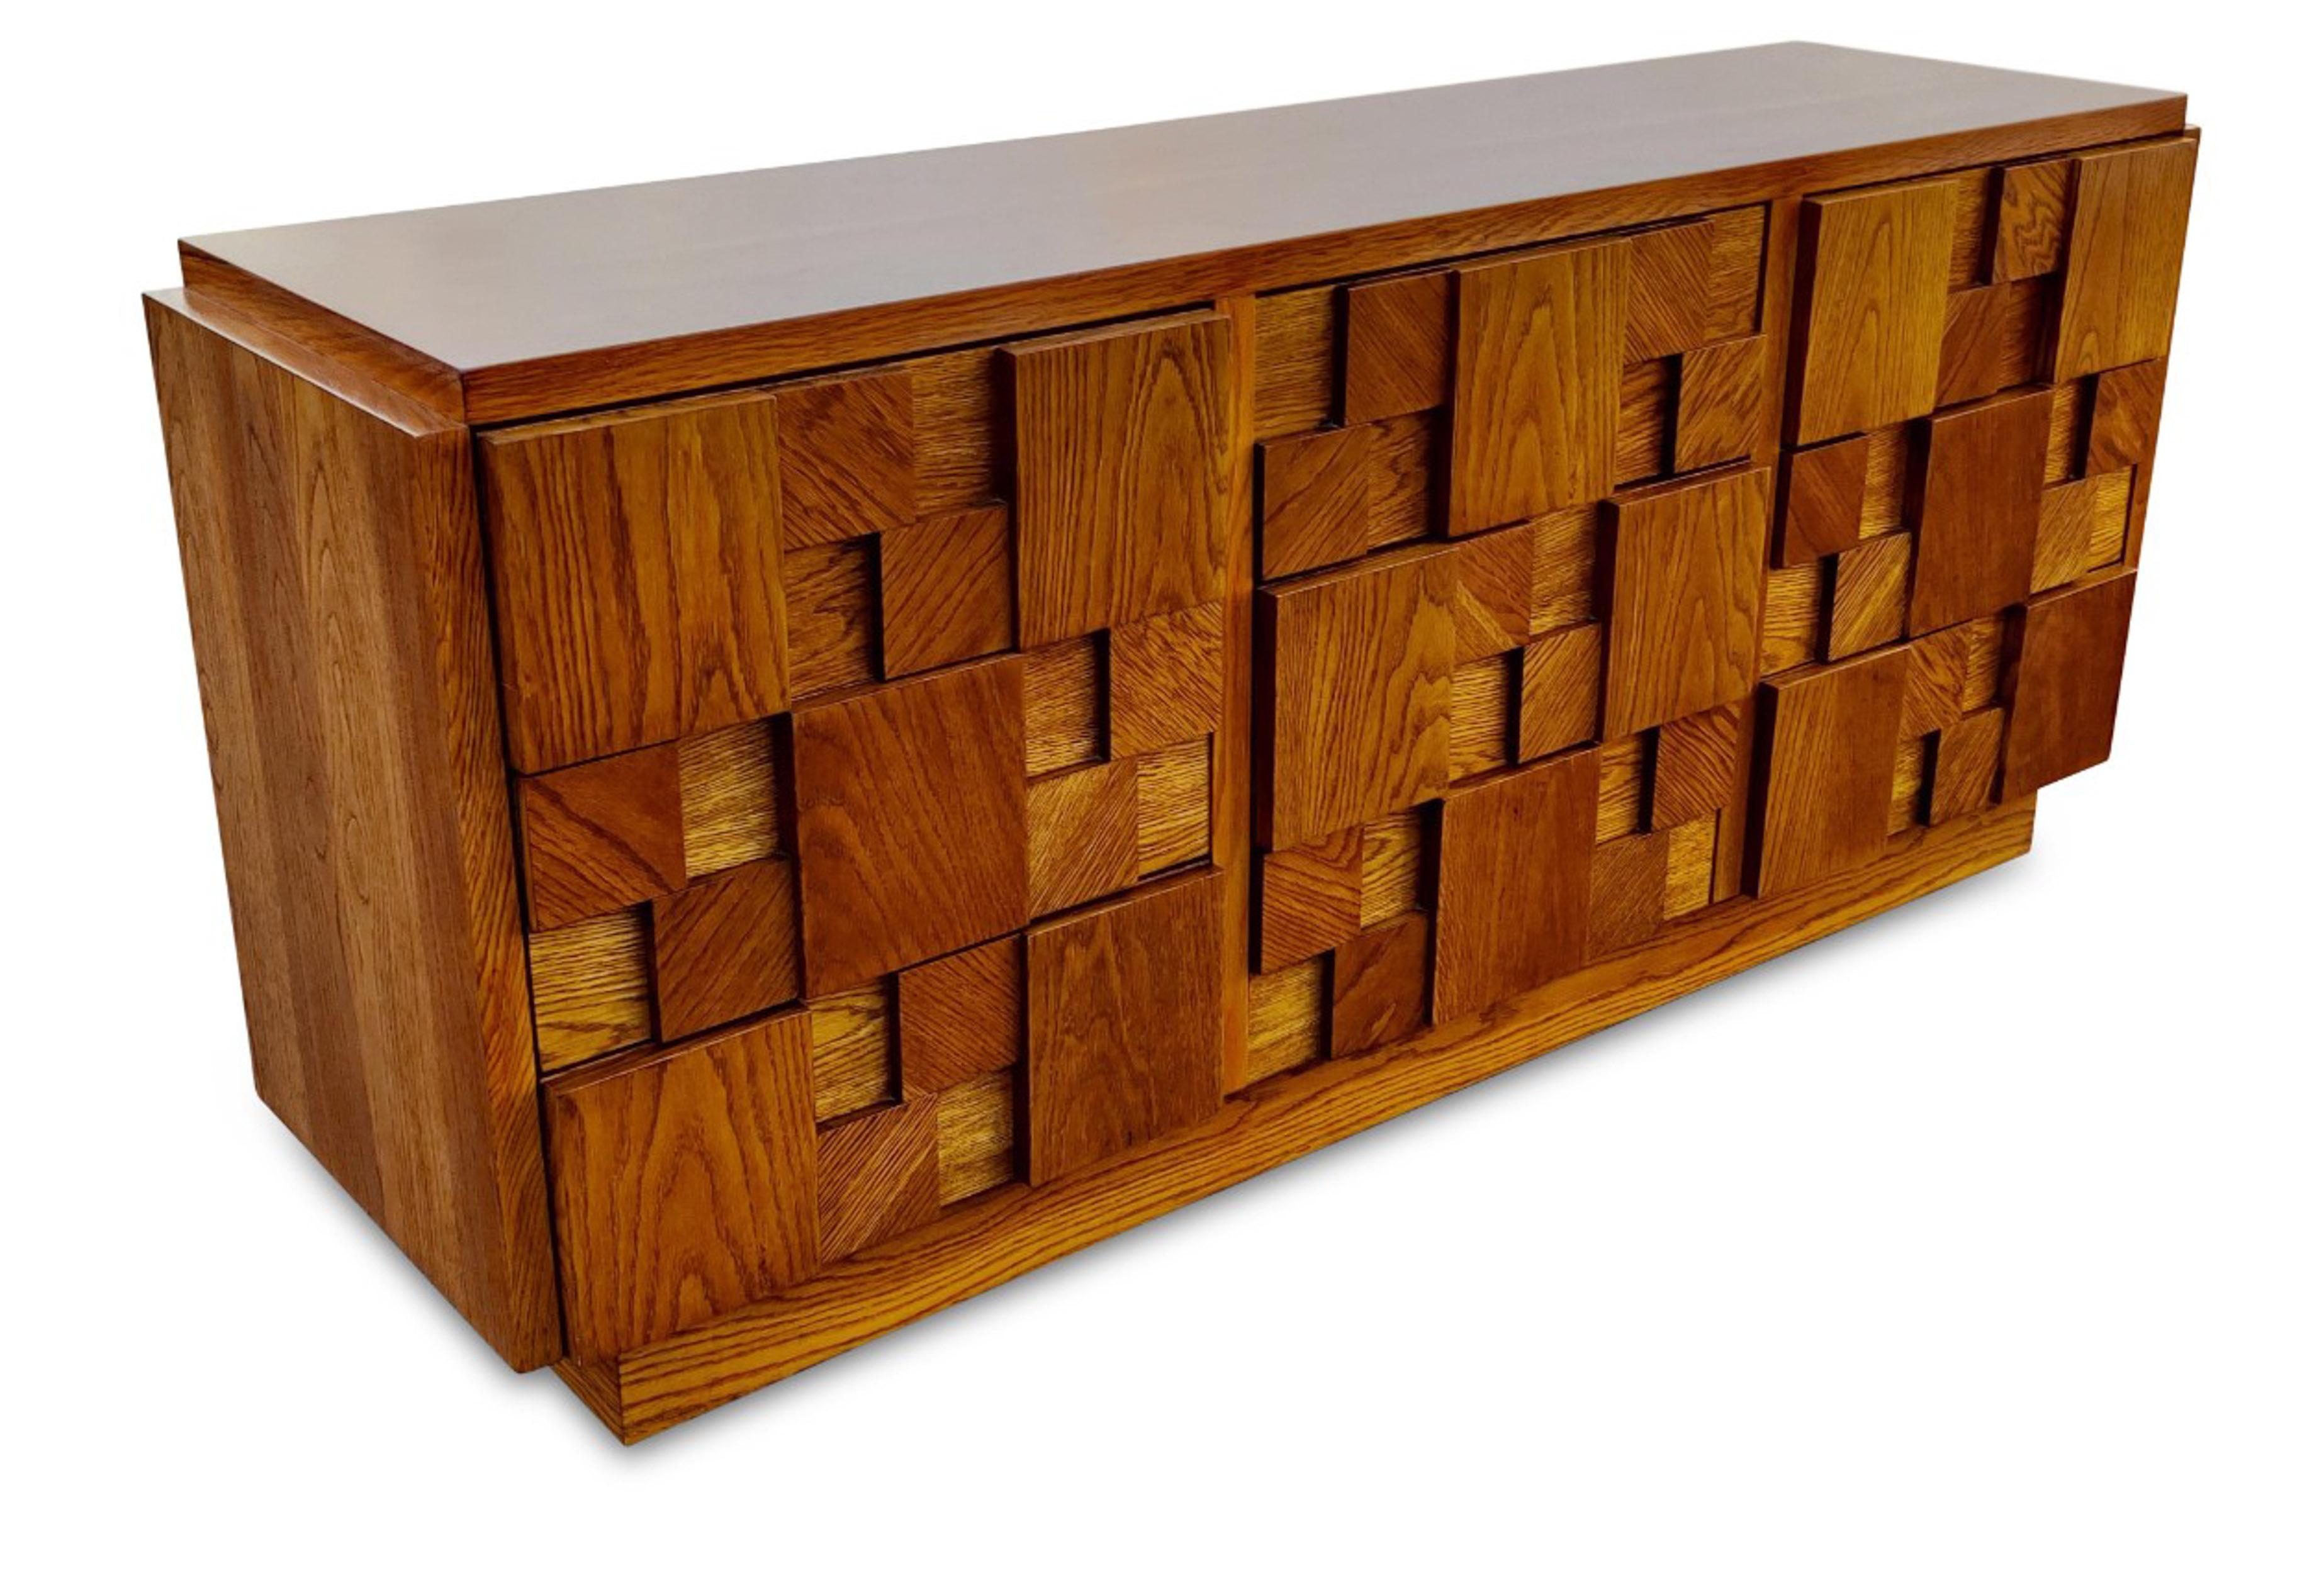 This dresser was designed in the brutalist style made iconic by Paul Evans, and manufactured by Lane USA, circa 1970s. Made with varied blocks of oak attached to the front, it lends an imposing and dramatic look while retaining the rich color and